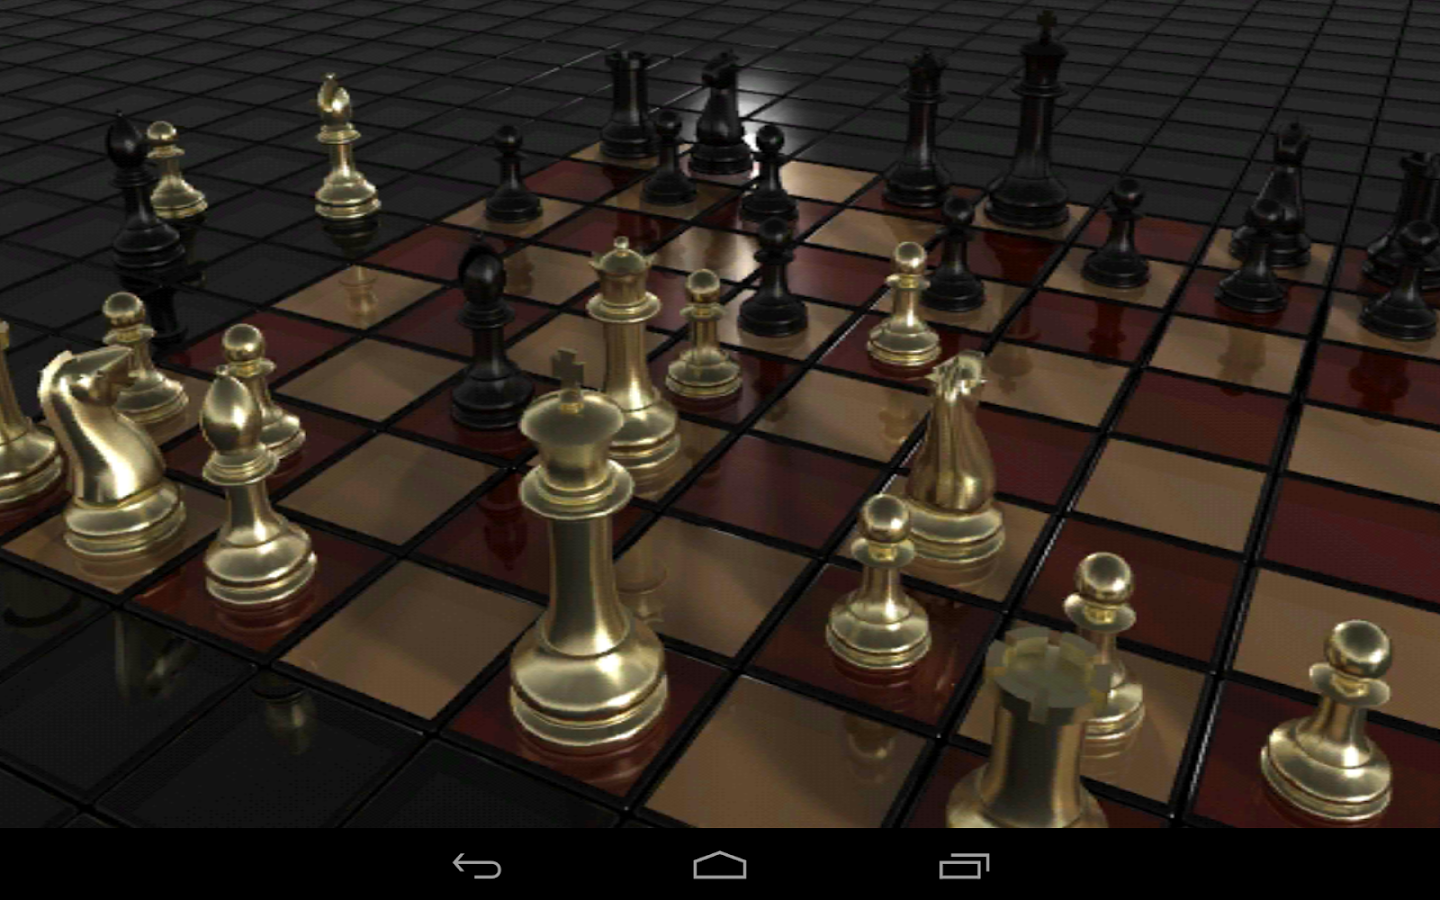 https://static.download-vn.com/com.atrilliongames.chessgame6.png